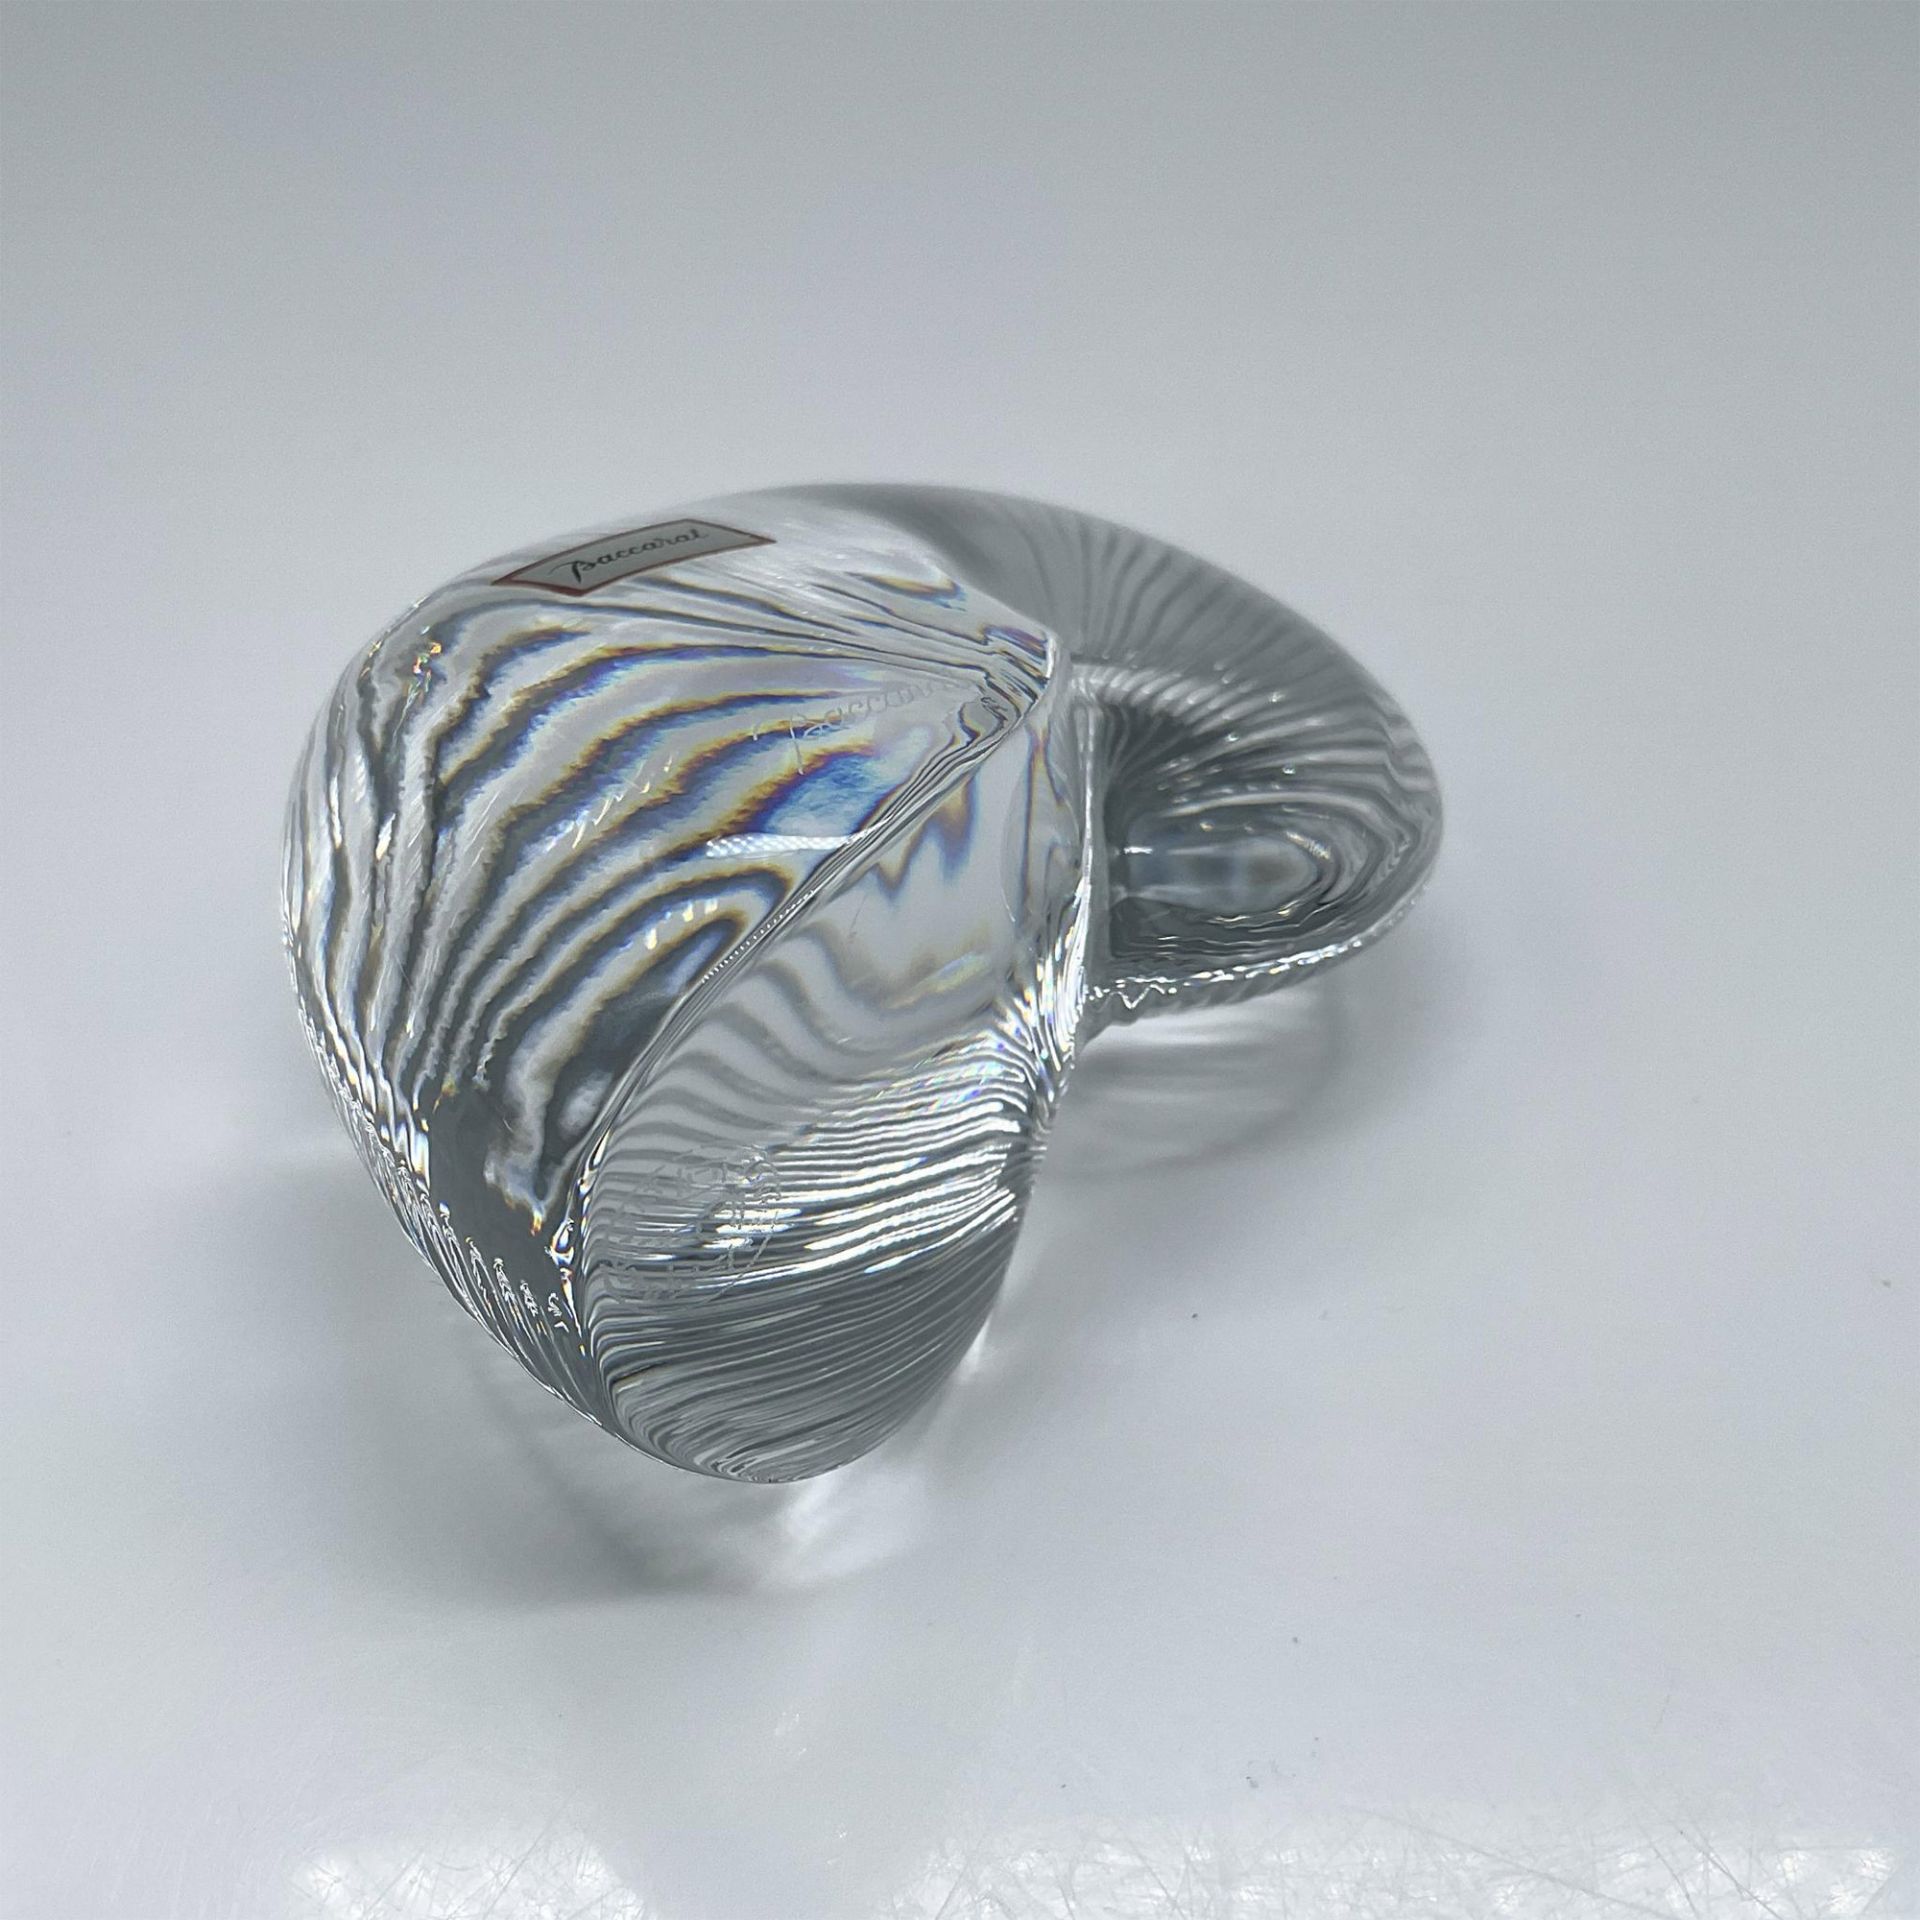 Baccarat Crystal Nautilus Shell Paperweight - Image 5 of 5